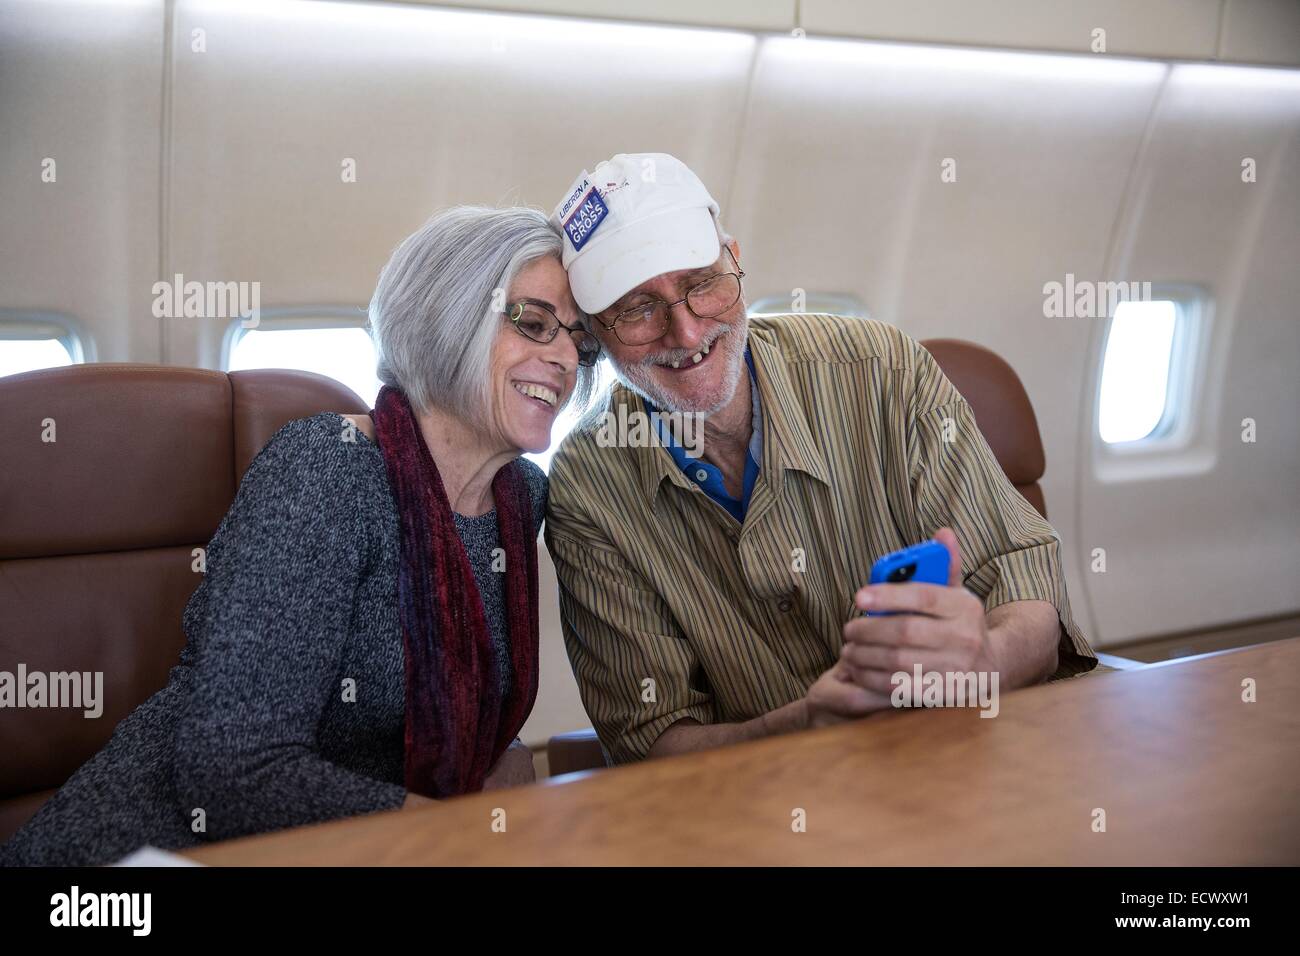 USAID contractor Alan Gross, imprisoned in Cuba for five years, takes a selfie with his wife Judy onboard a government plane headed back to Washington following his release December 17, 2014 near Havana, Cuba. Stock Photo